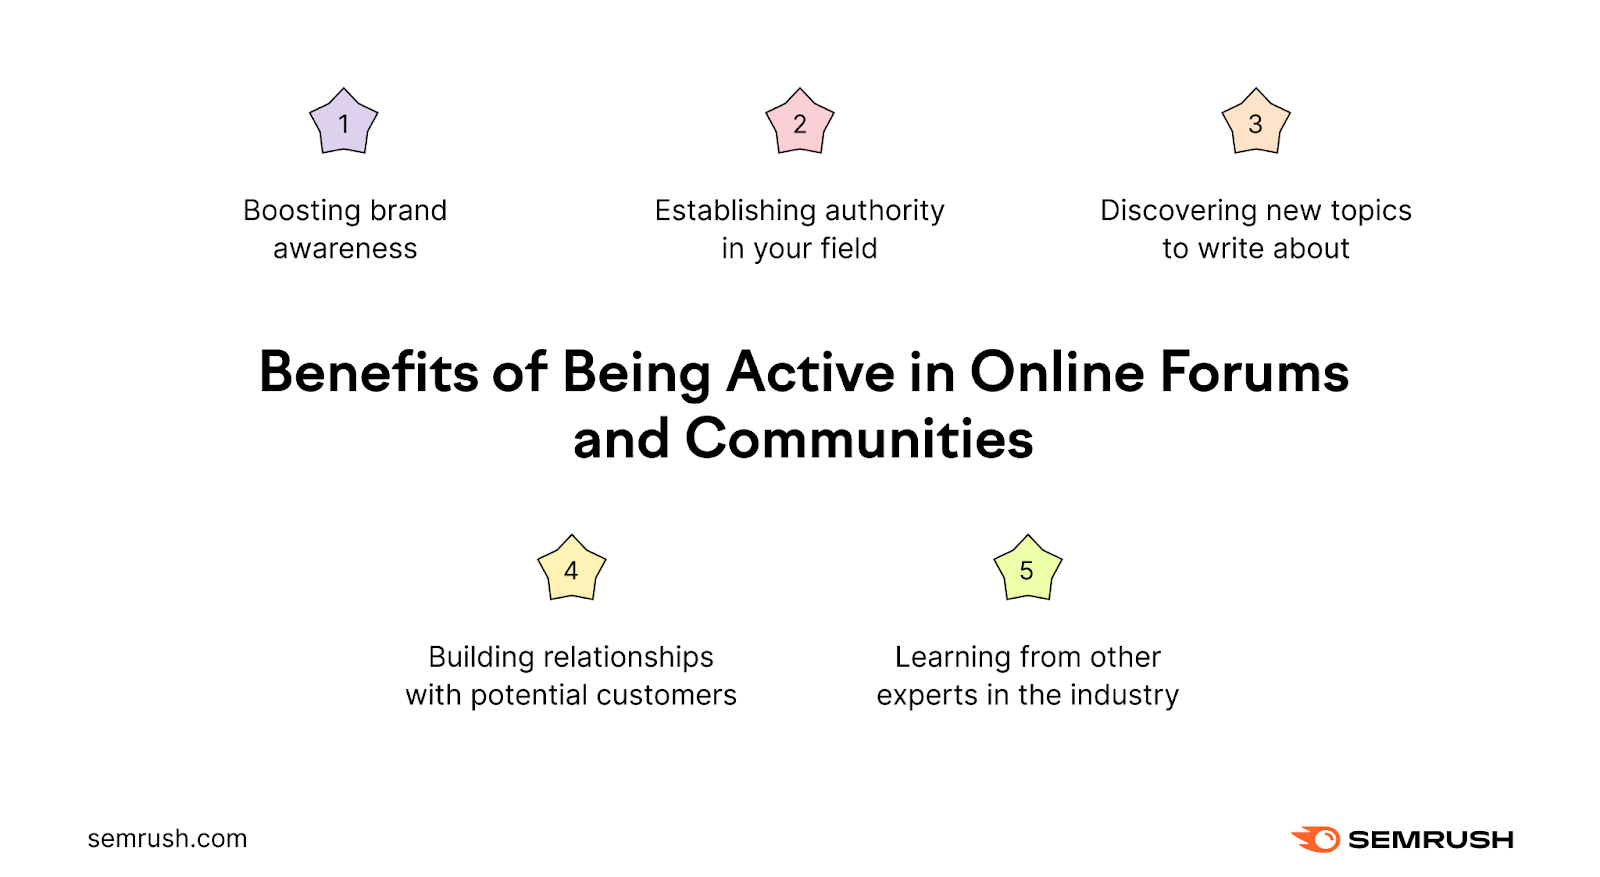 Benefits of being active in online forums and communities are boosting brand awareness, establishing authority in your field, discovering new topics to write about, building relationships with potential customers, learning from other experts in the industry.